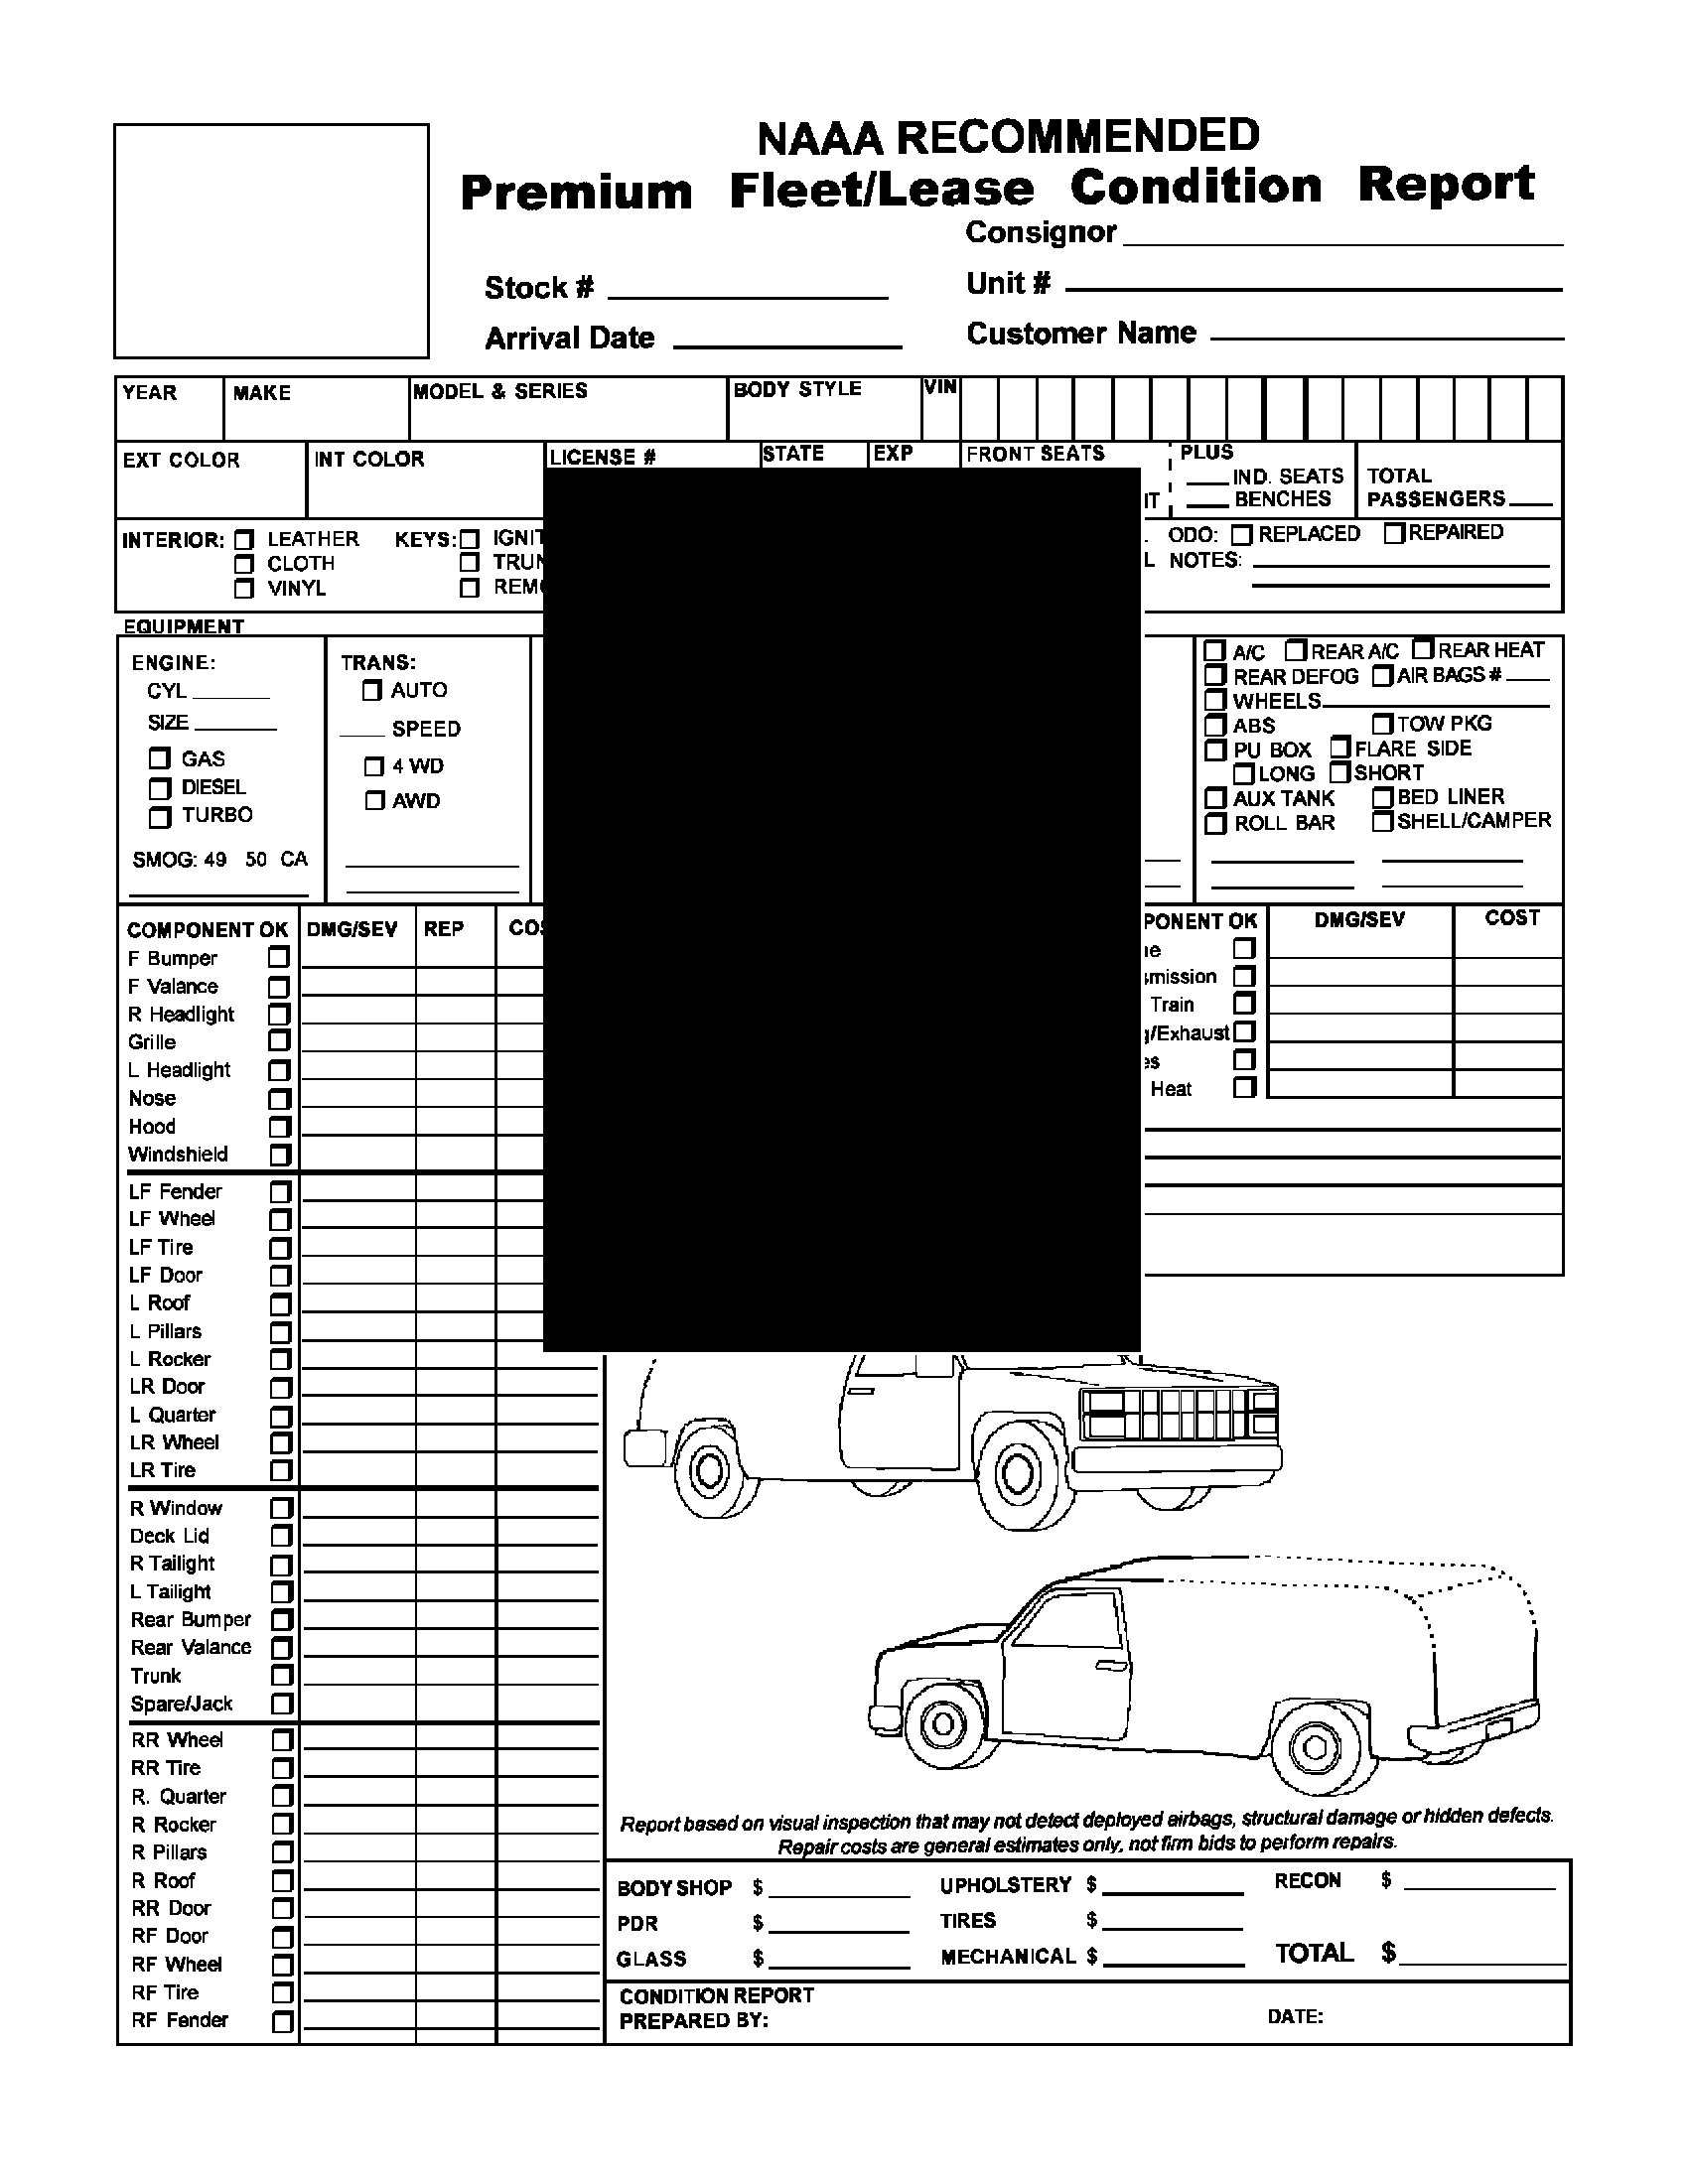 Premium Fleet/Lease Condition Report For Van Or Truck | Legal Forms And with Fleet Report Template